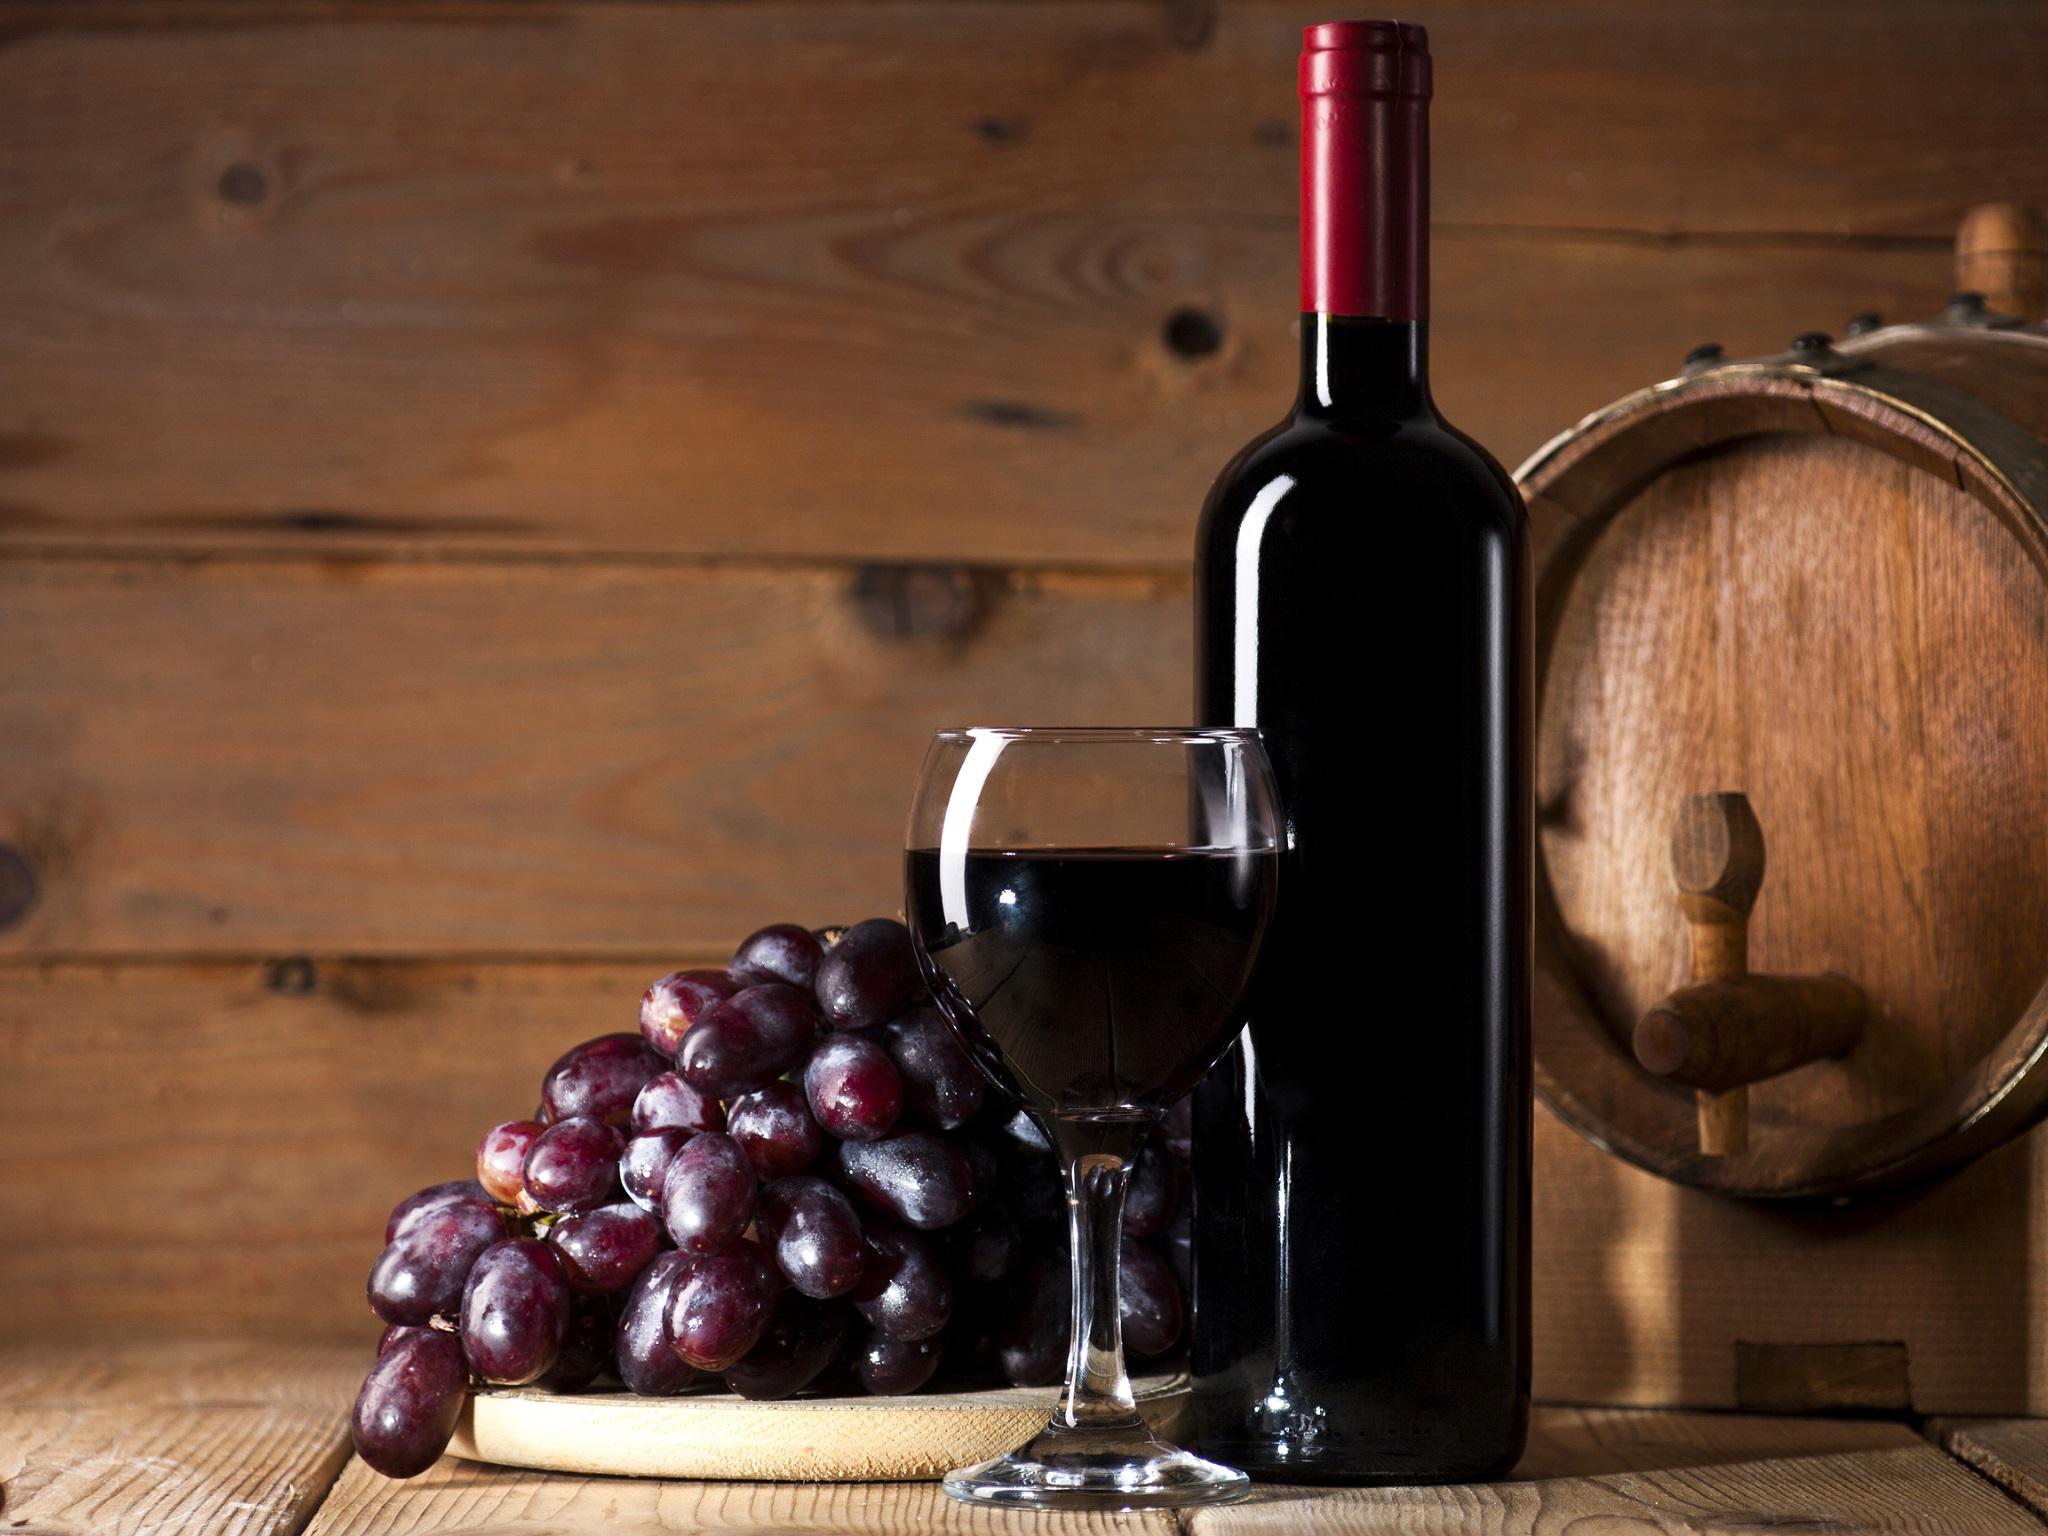 Researchers believe older test subjects may reveal whether red wine's resveratrol content could improve brain function